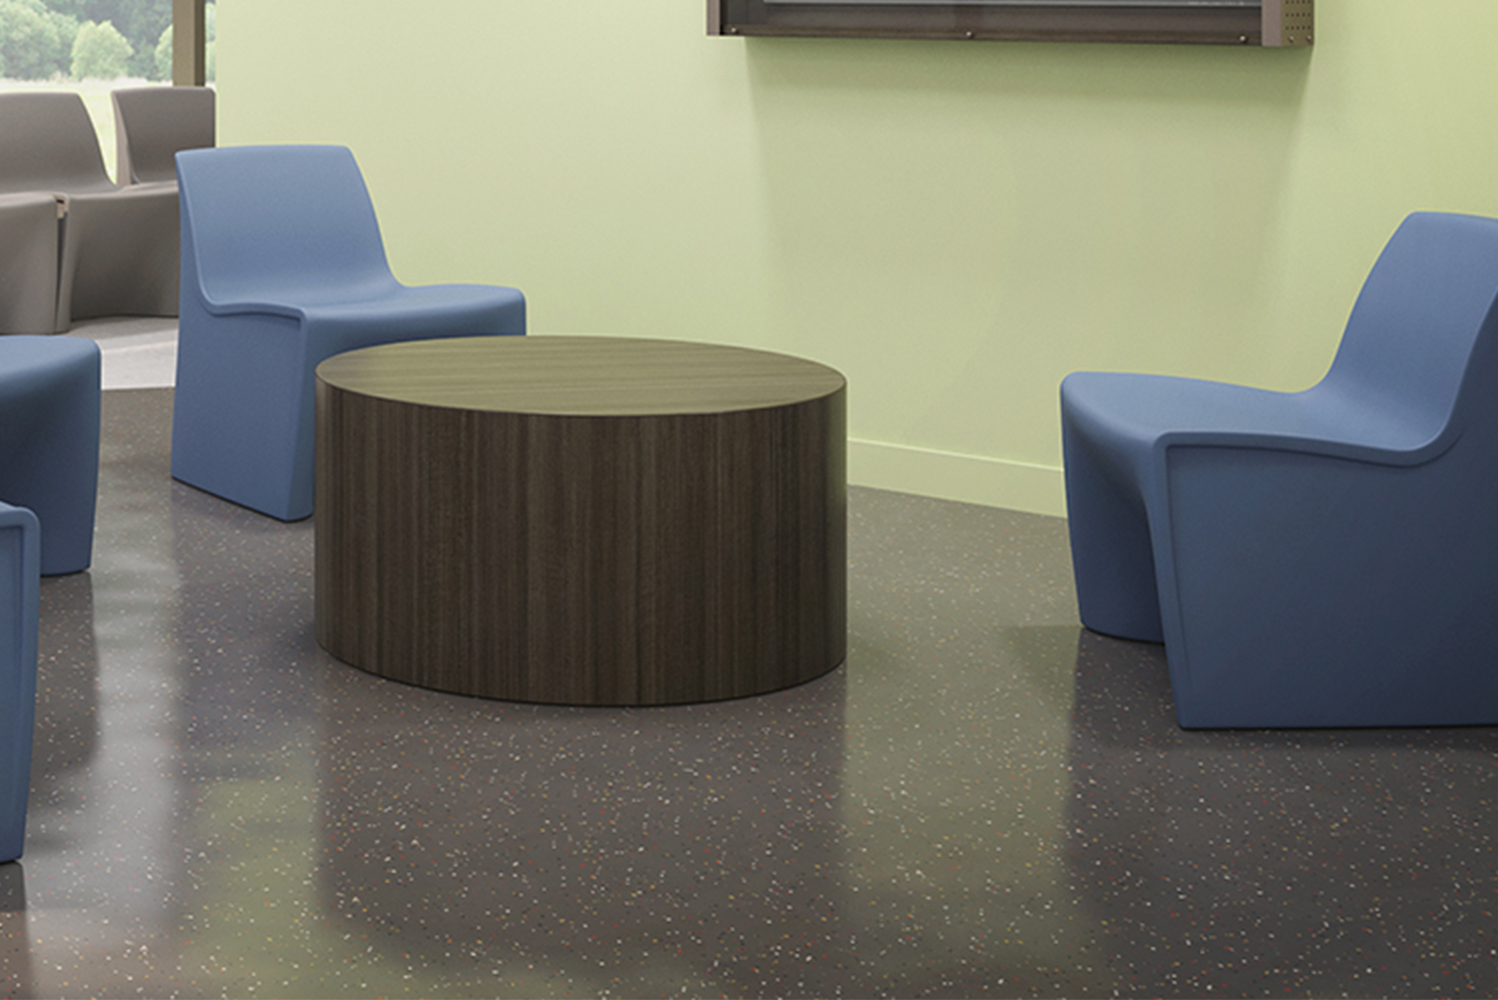 Spec Furniture launched the Hardi seating series available in lounge and dining designs 